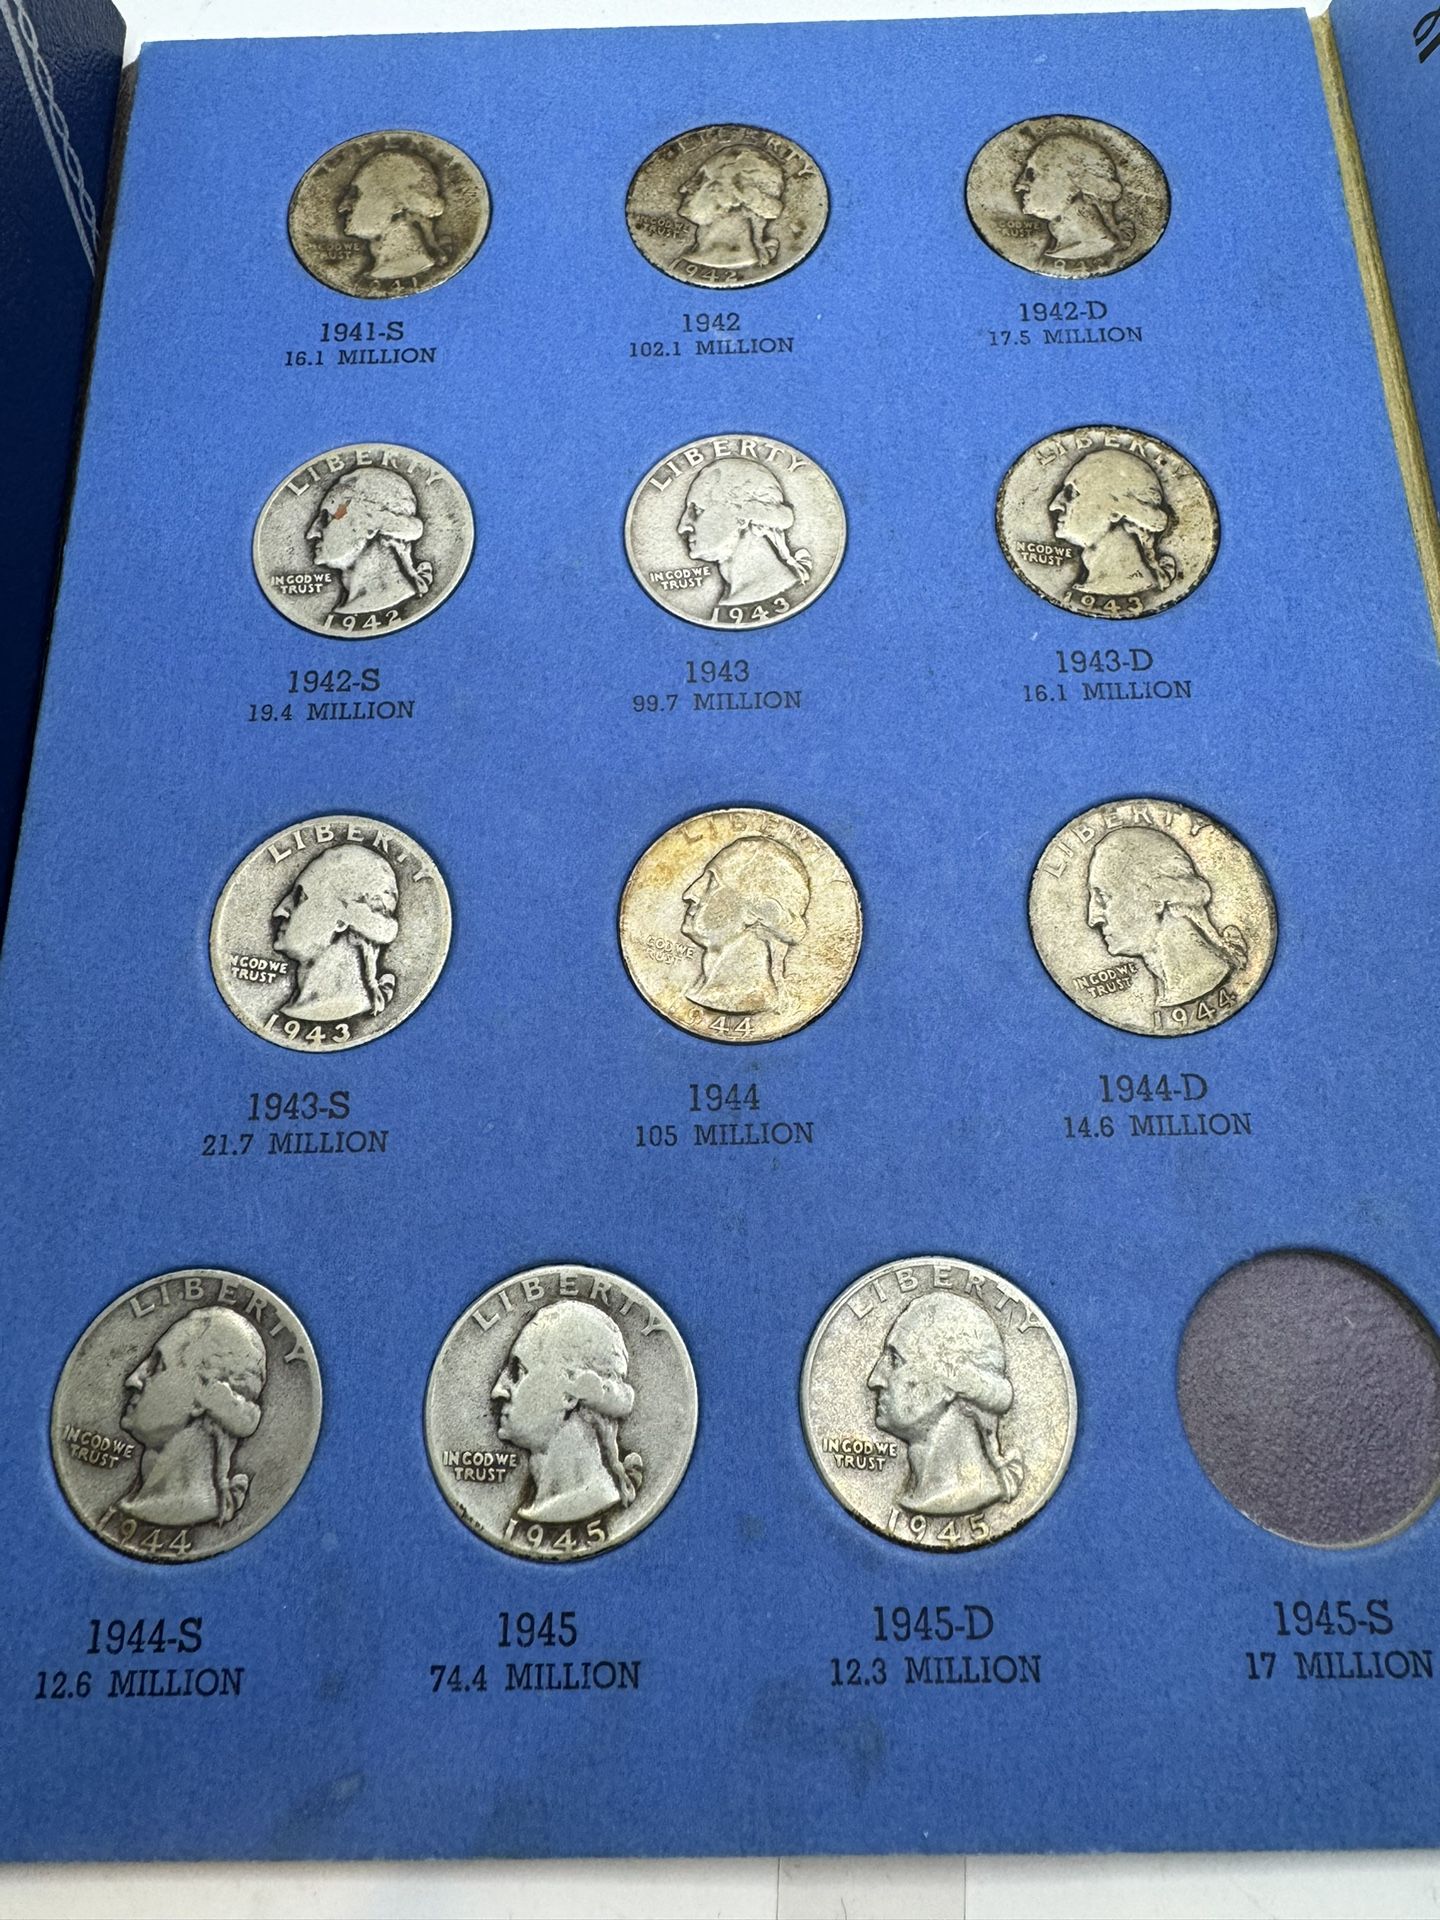 24 90% Silver Washington Quarter Coins From 1934 To 1945 With Album